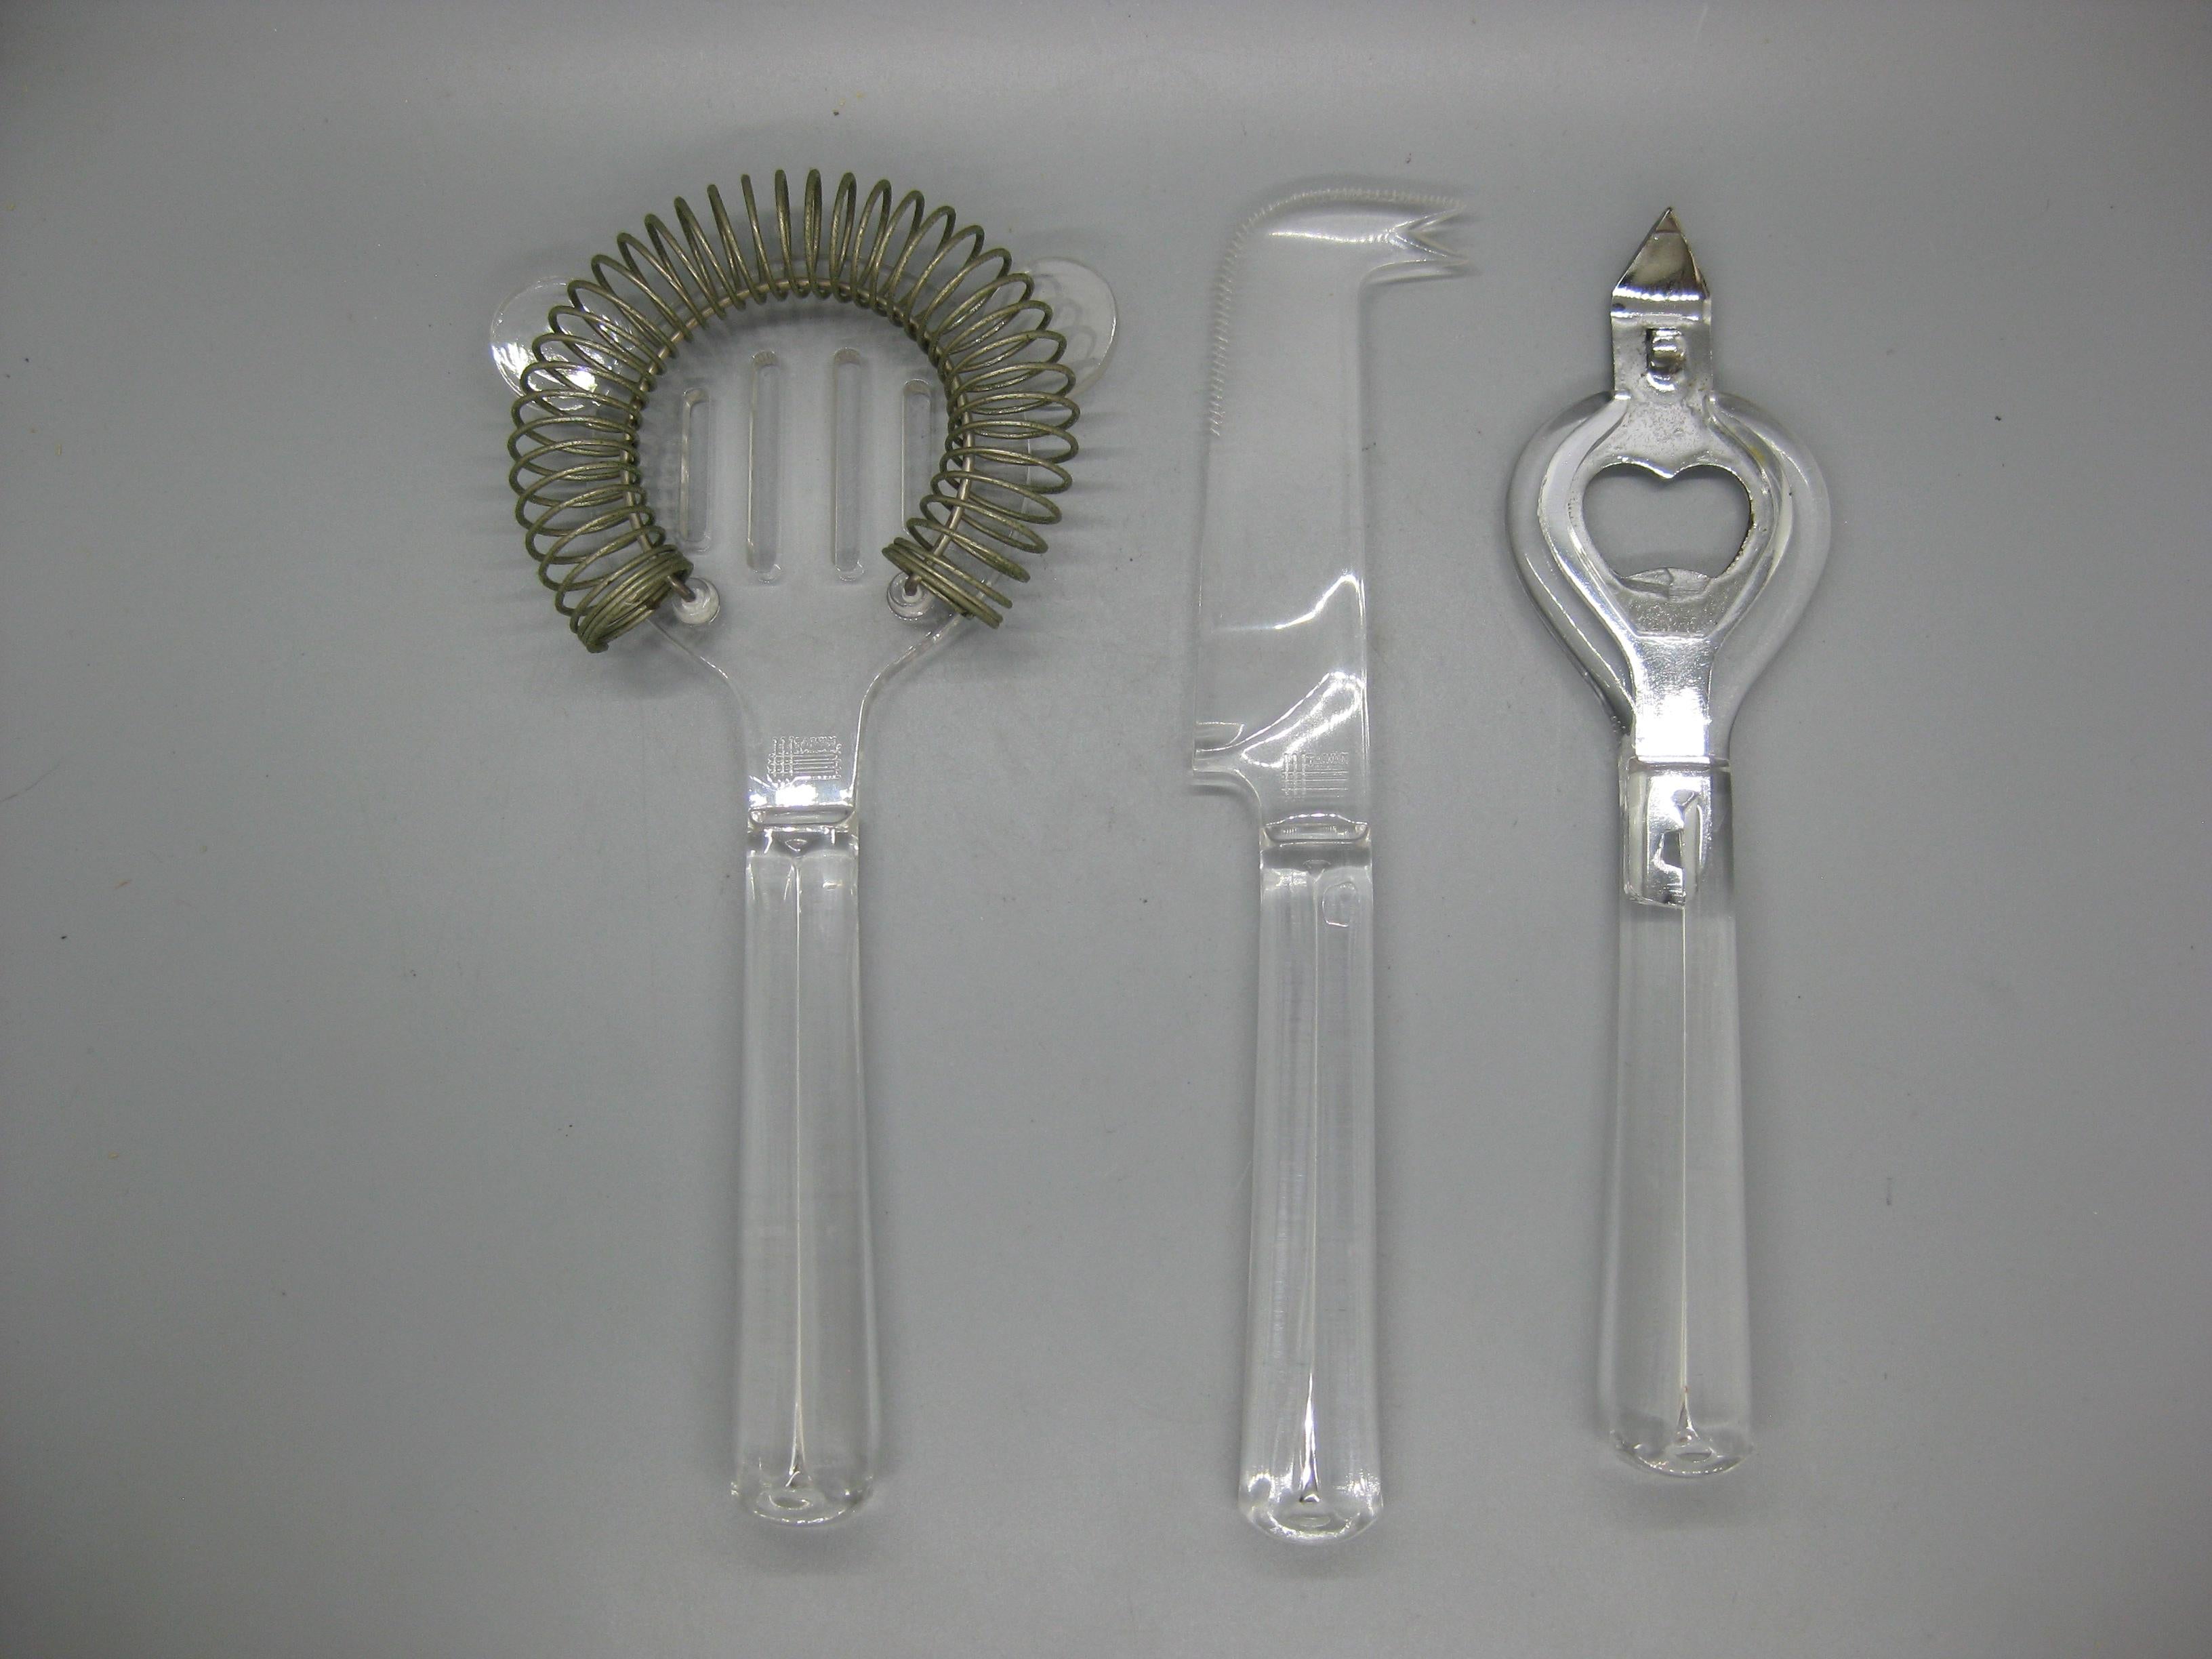 Vintage 1970's Lucite Acrylic Bar Tool Set Barware Serving Pieces w/Caddy For Sale 4